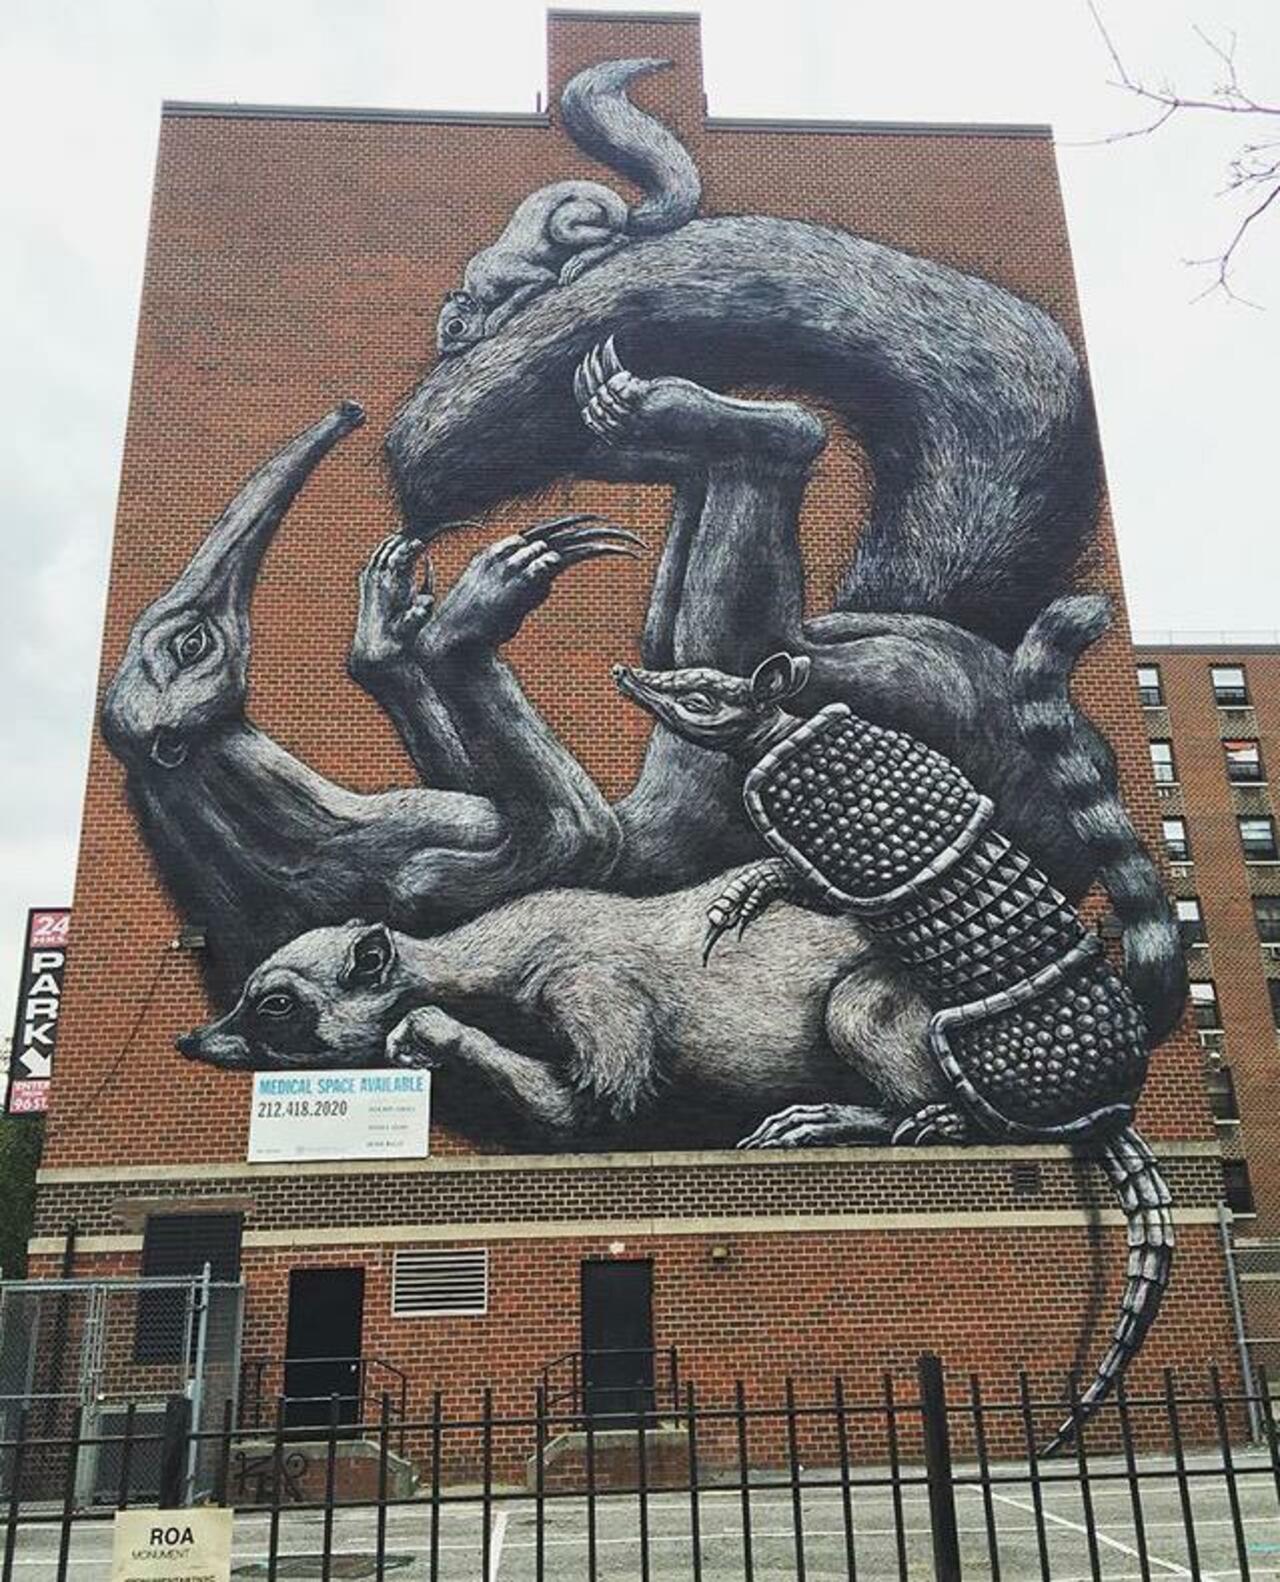 The completed new large scale Street Art wall by ROA in NYC

#art #graffiti #mural #streetart http://t.co/NzBaFzCR0i